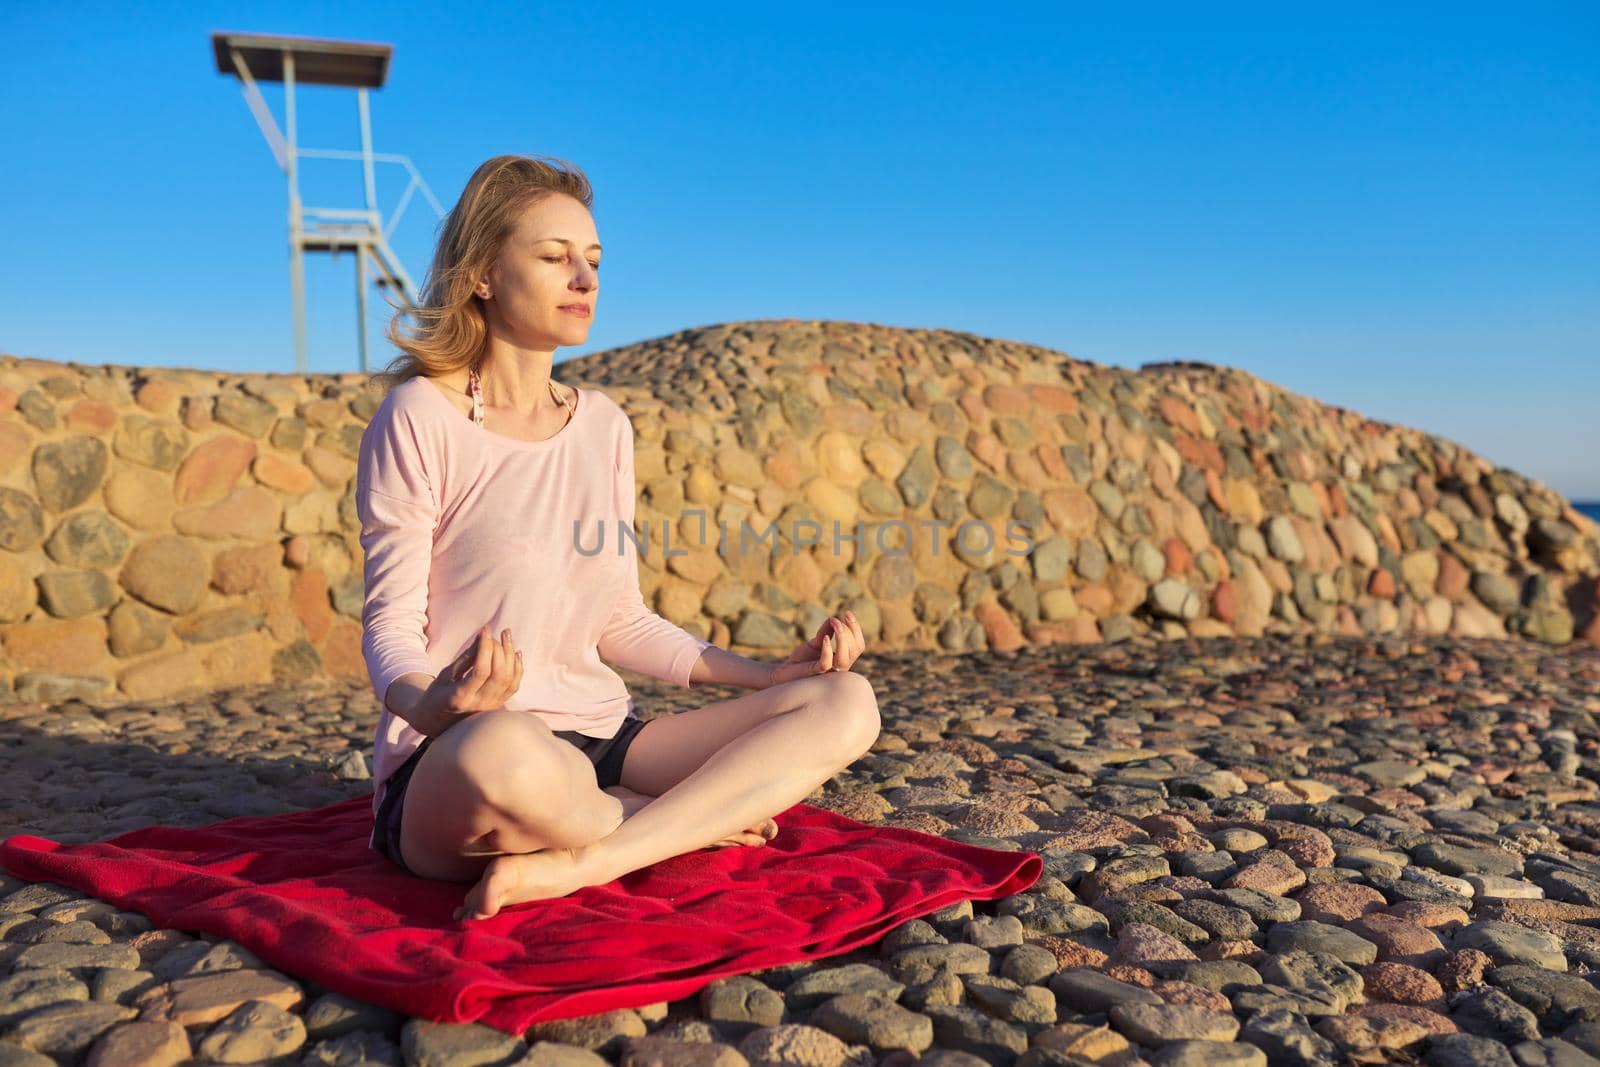 Beautiful mature woman blonde sitting in lotus position and meditating on the seashore at sunset. Relaxation, relaxation, enjoying nature by the sea